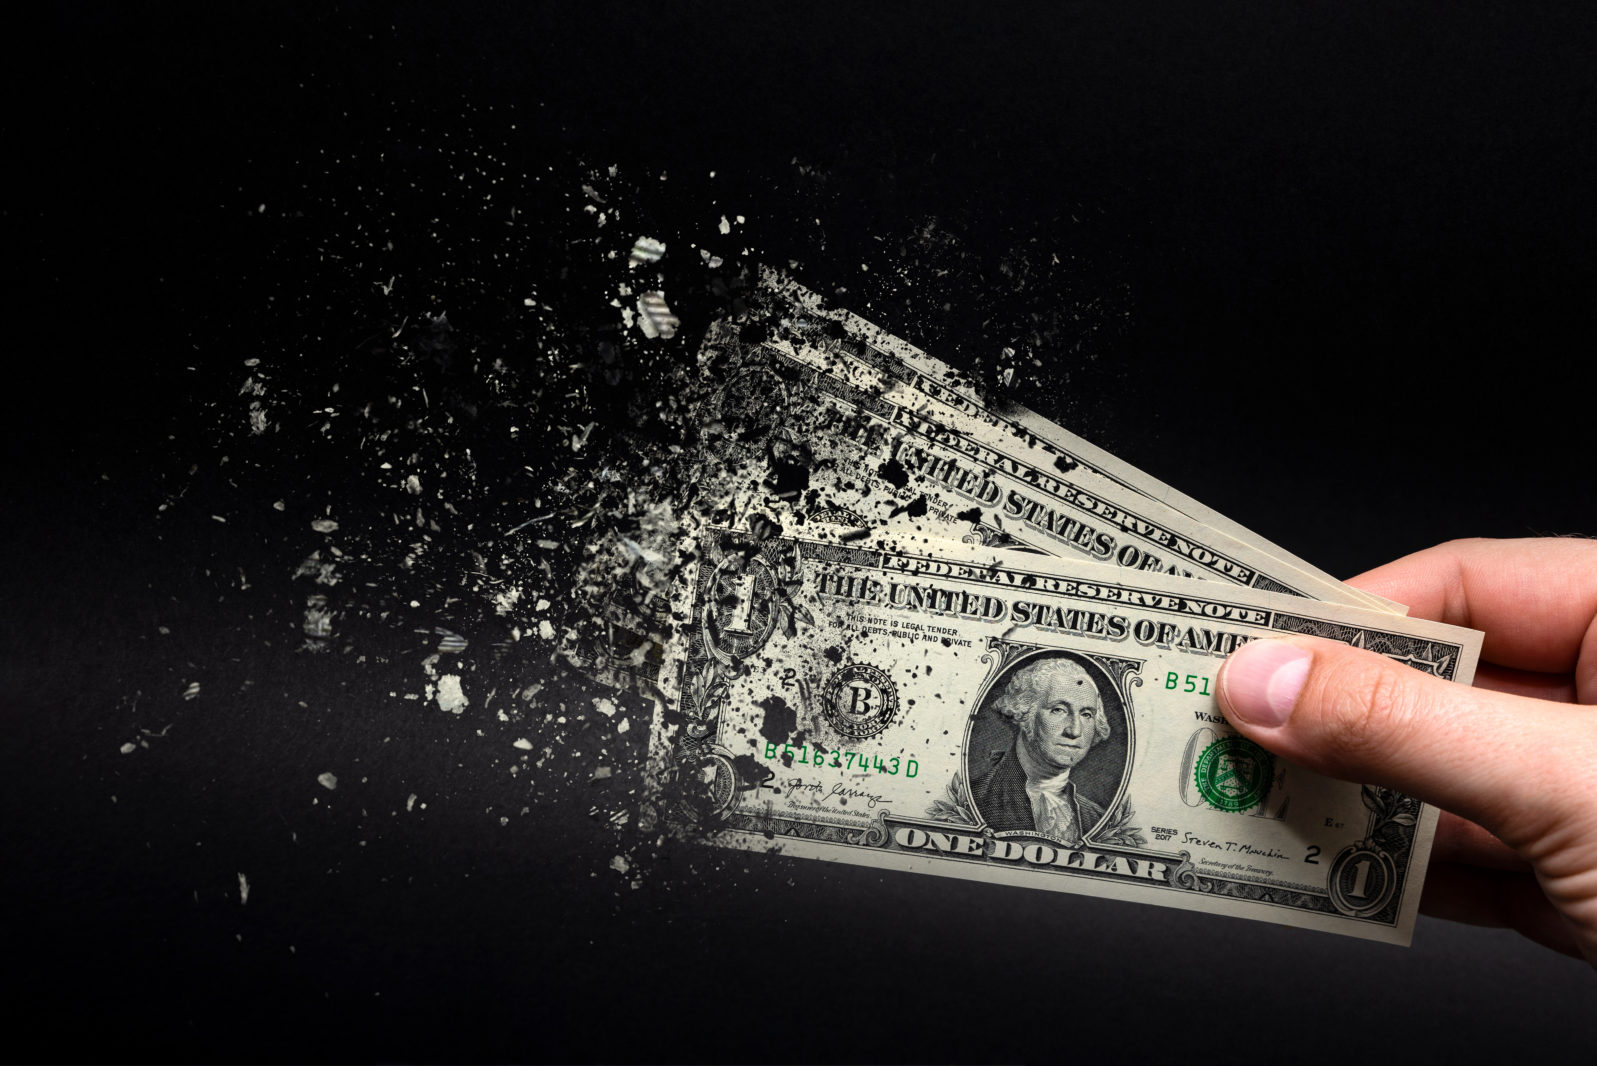 Inflation, dollar hyperinflation with black background. One dollar bill is sprayed in the hand of a man on a black background. The concept of decreasing purchasing power, inflation.